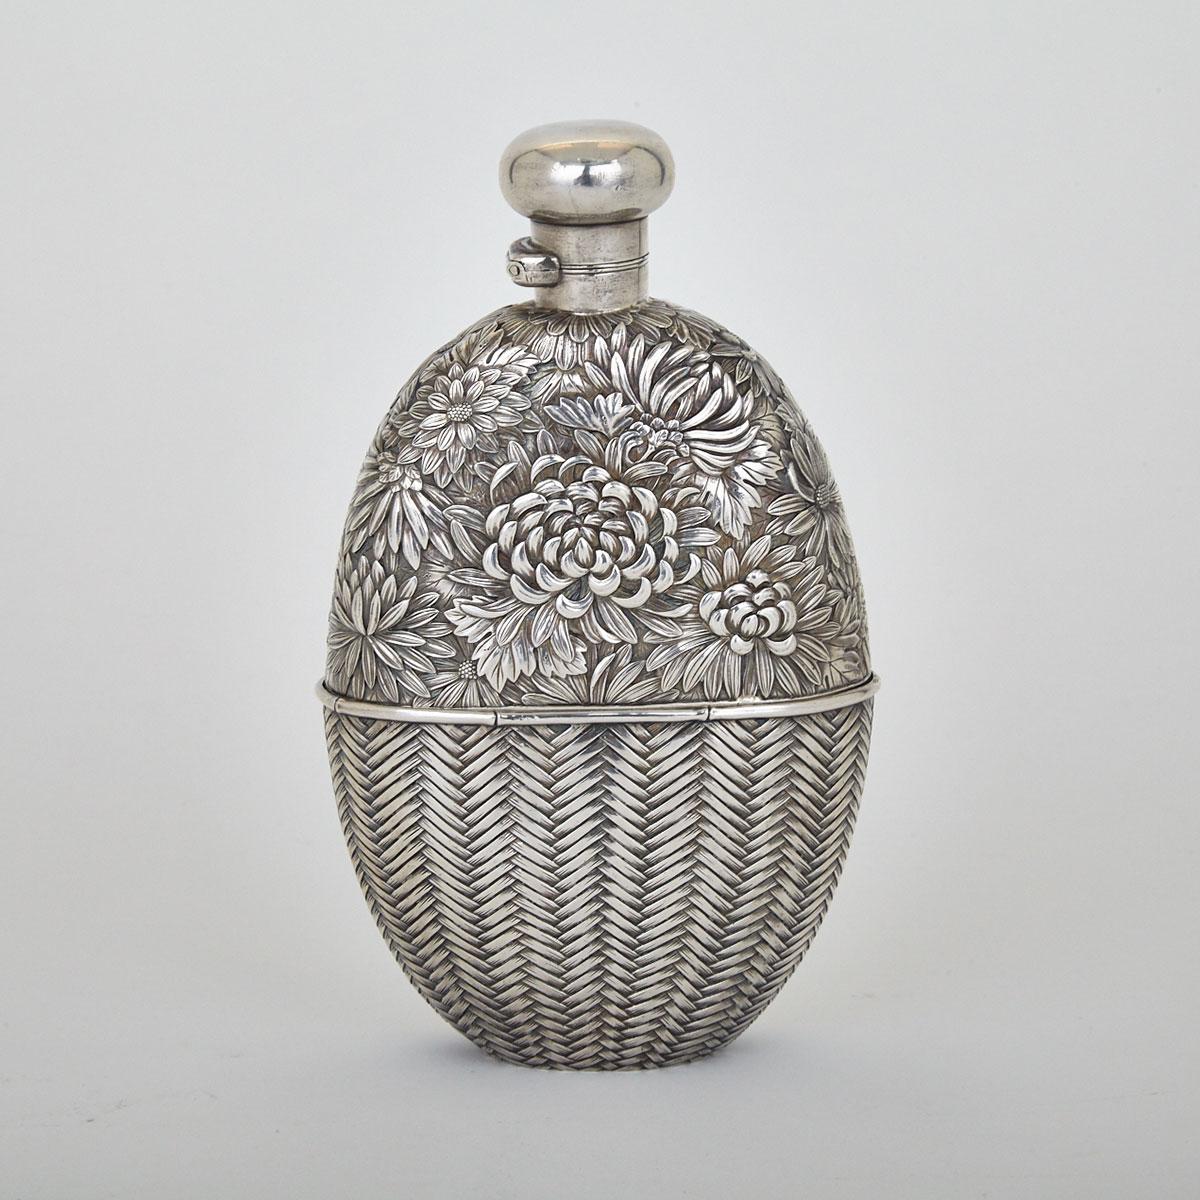 Japanese Silver Spirit Flask with Drinking Cup, c.1900